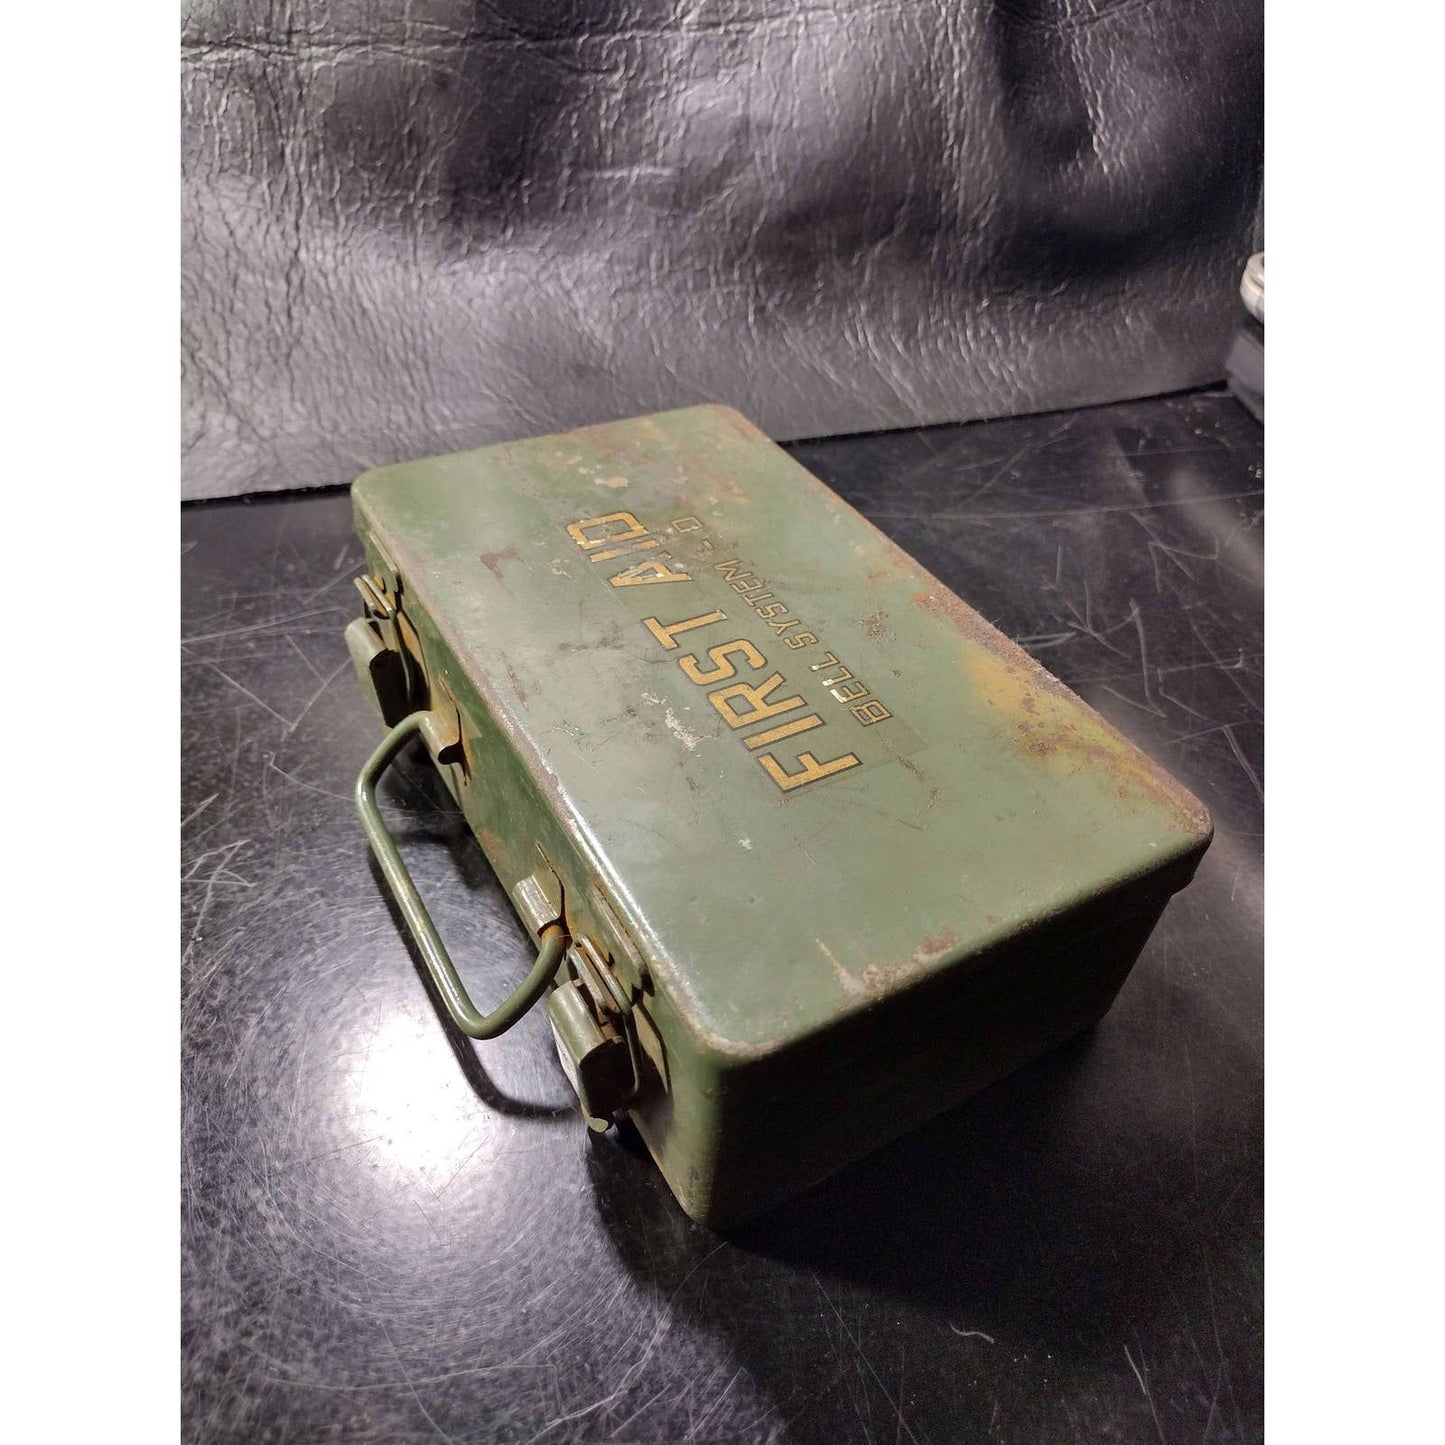 Vintage US Military First Aid Kit w/ Contents by Bell Systems | US Army surplus military surplus medkit first aid kit